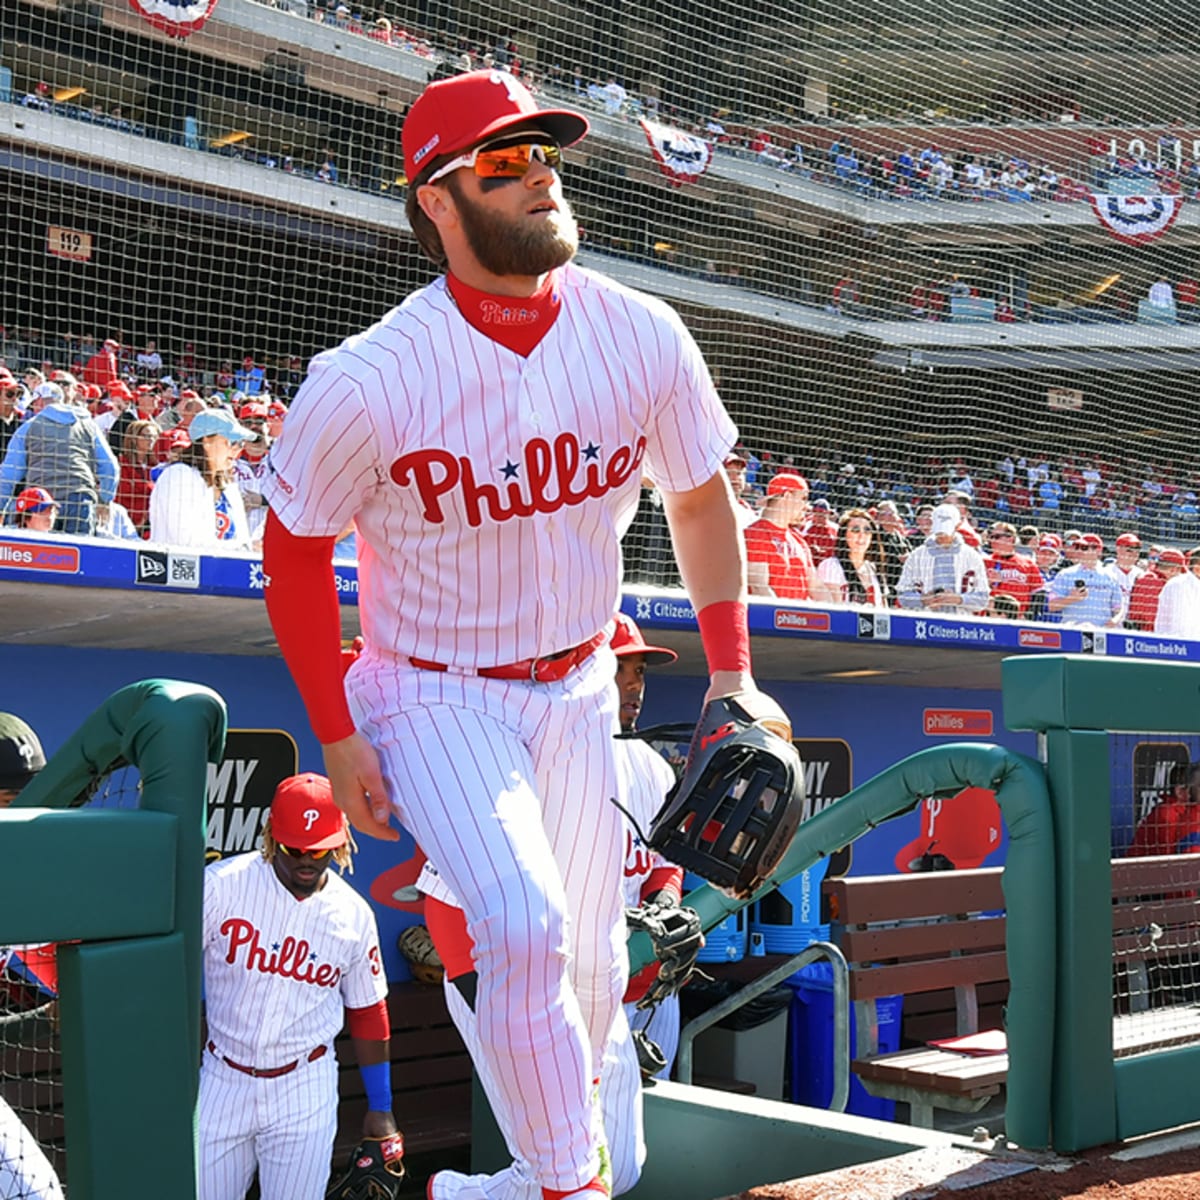 Bryce Harper is nearing his first-base debut for the Phillies